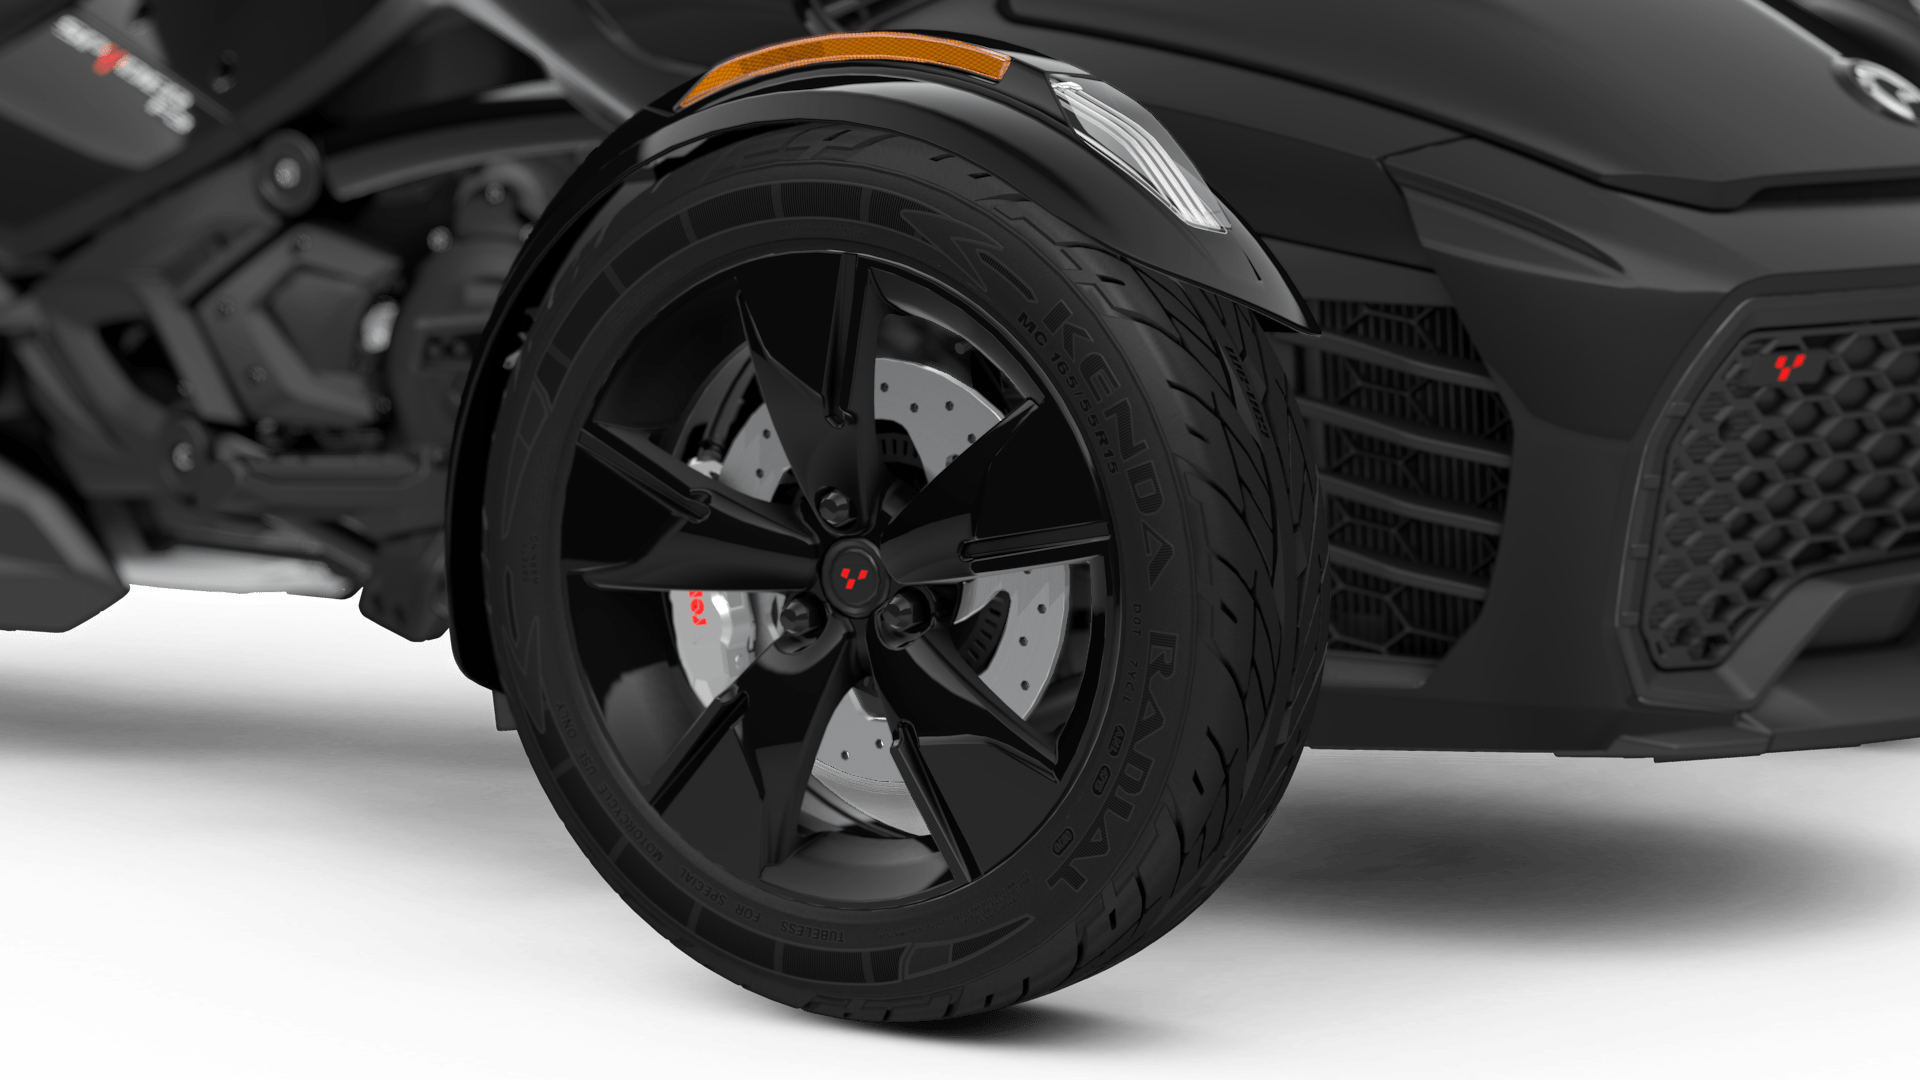 The wheel of a Can-Am Spyder equipped with a Brembo braking system